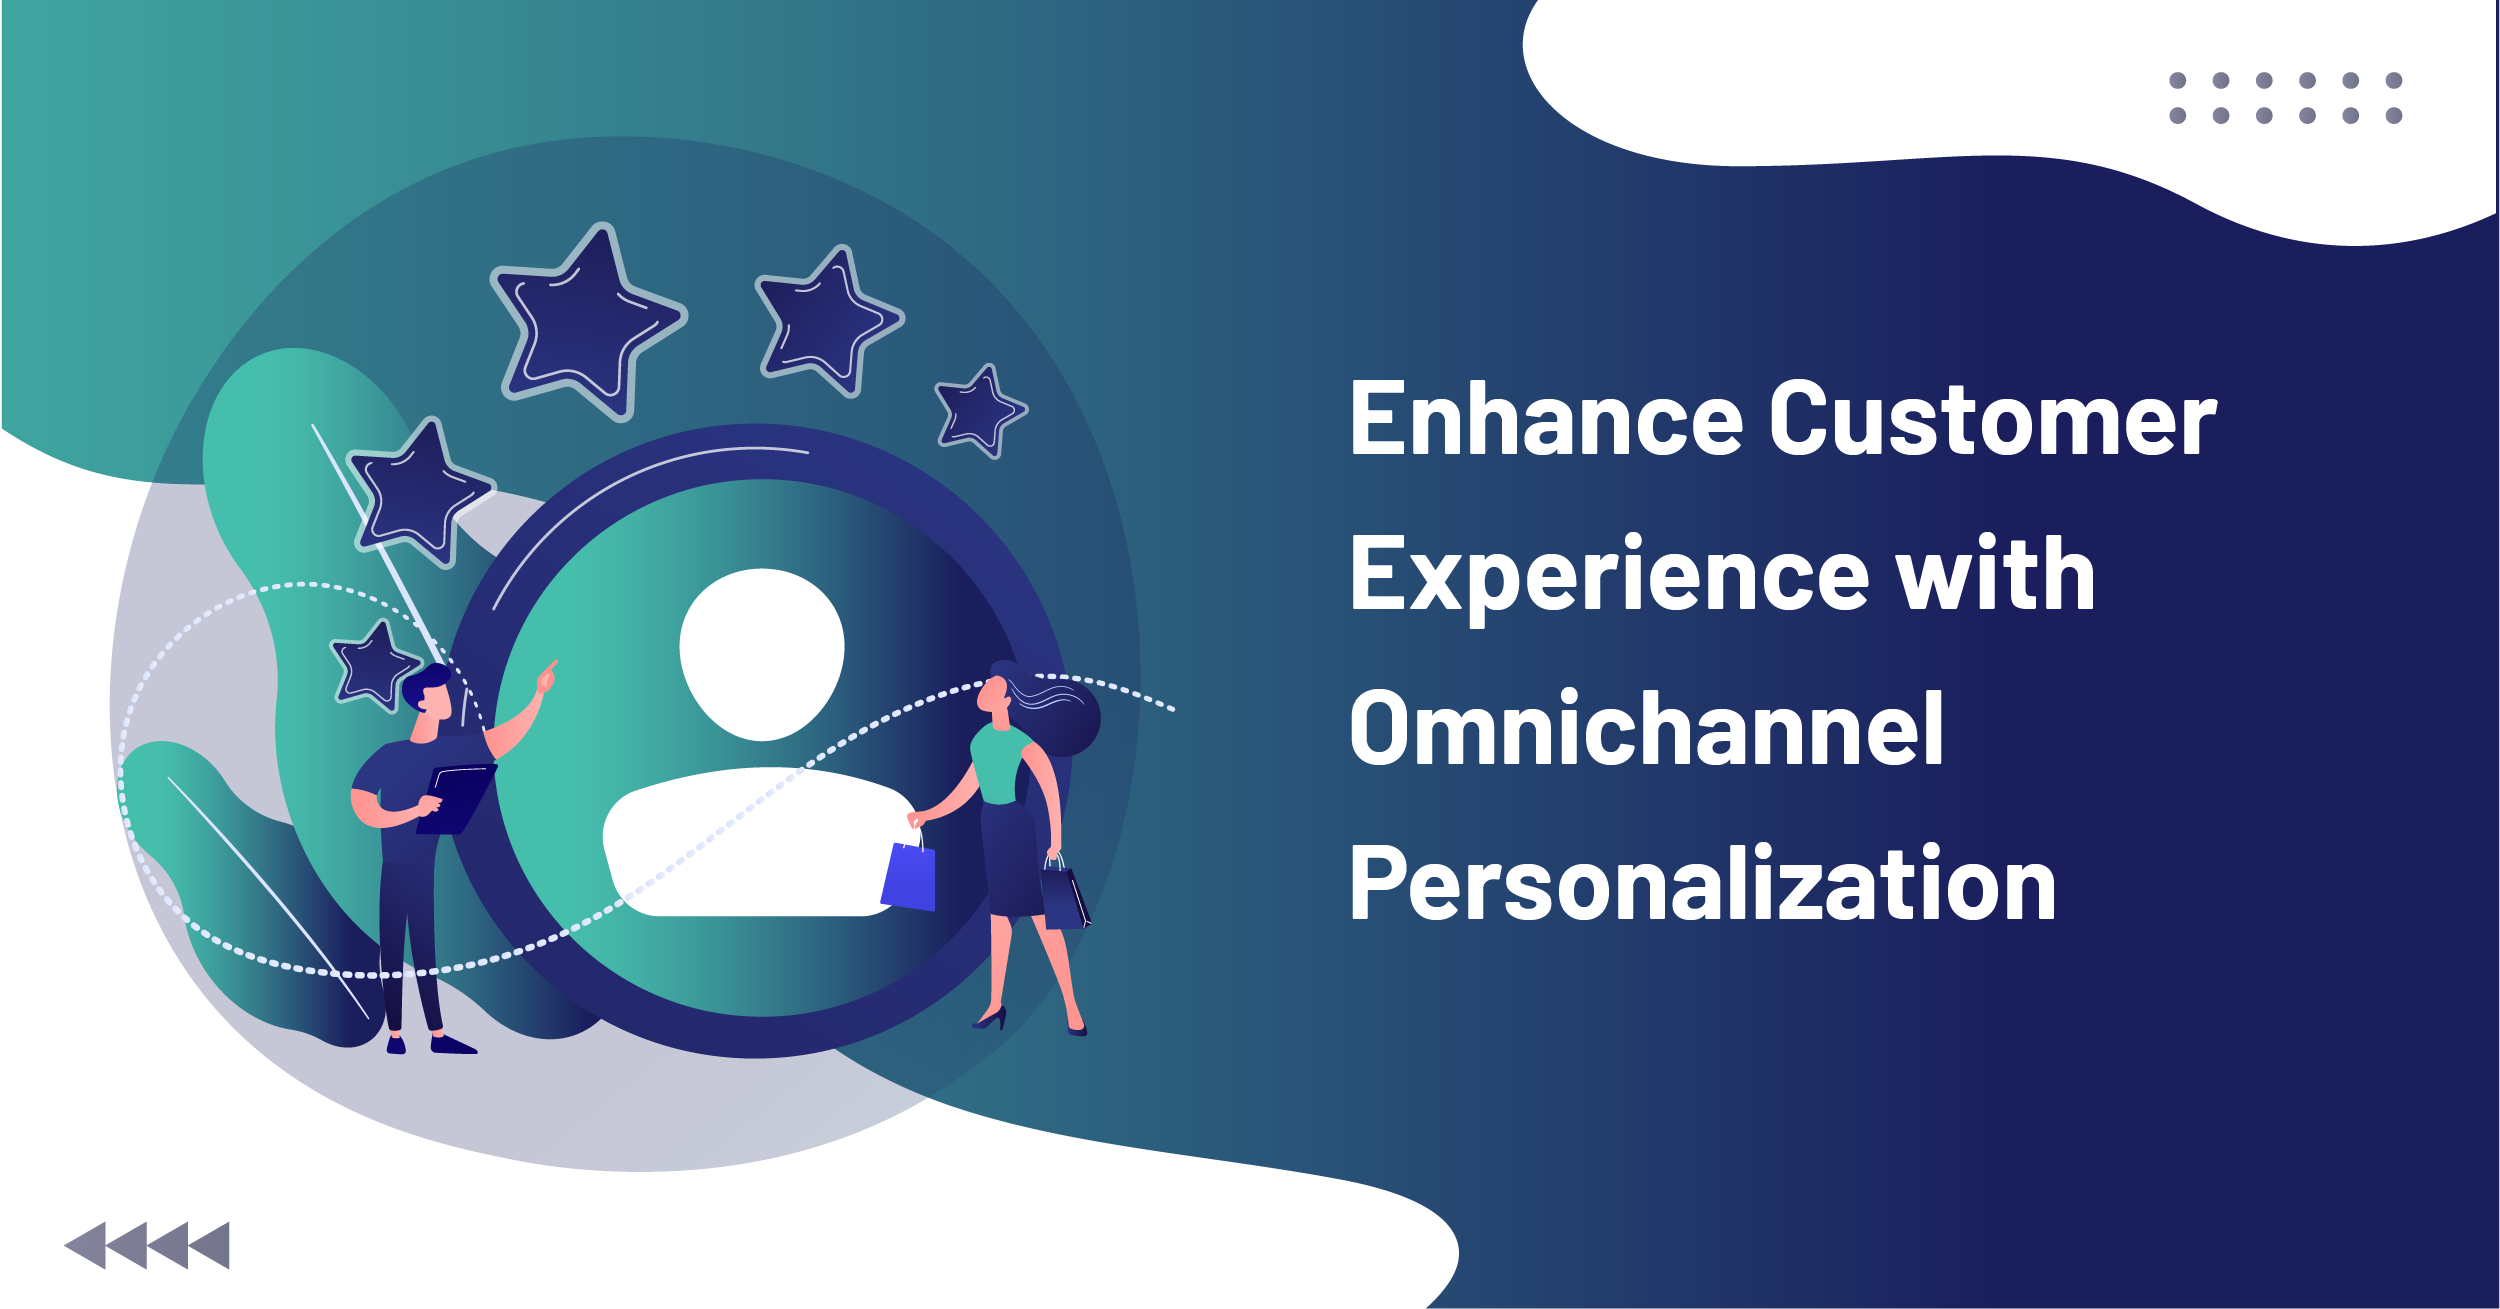 Enhance Customer Experience with Omnichannel Personalization